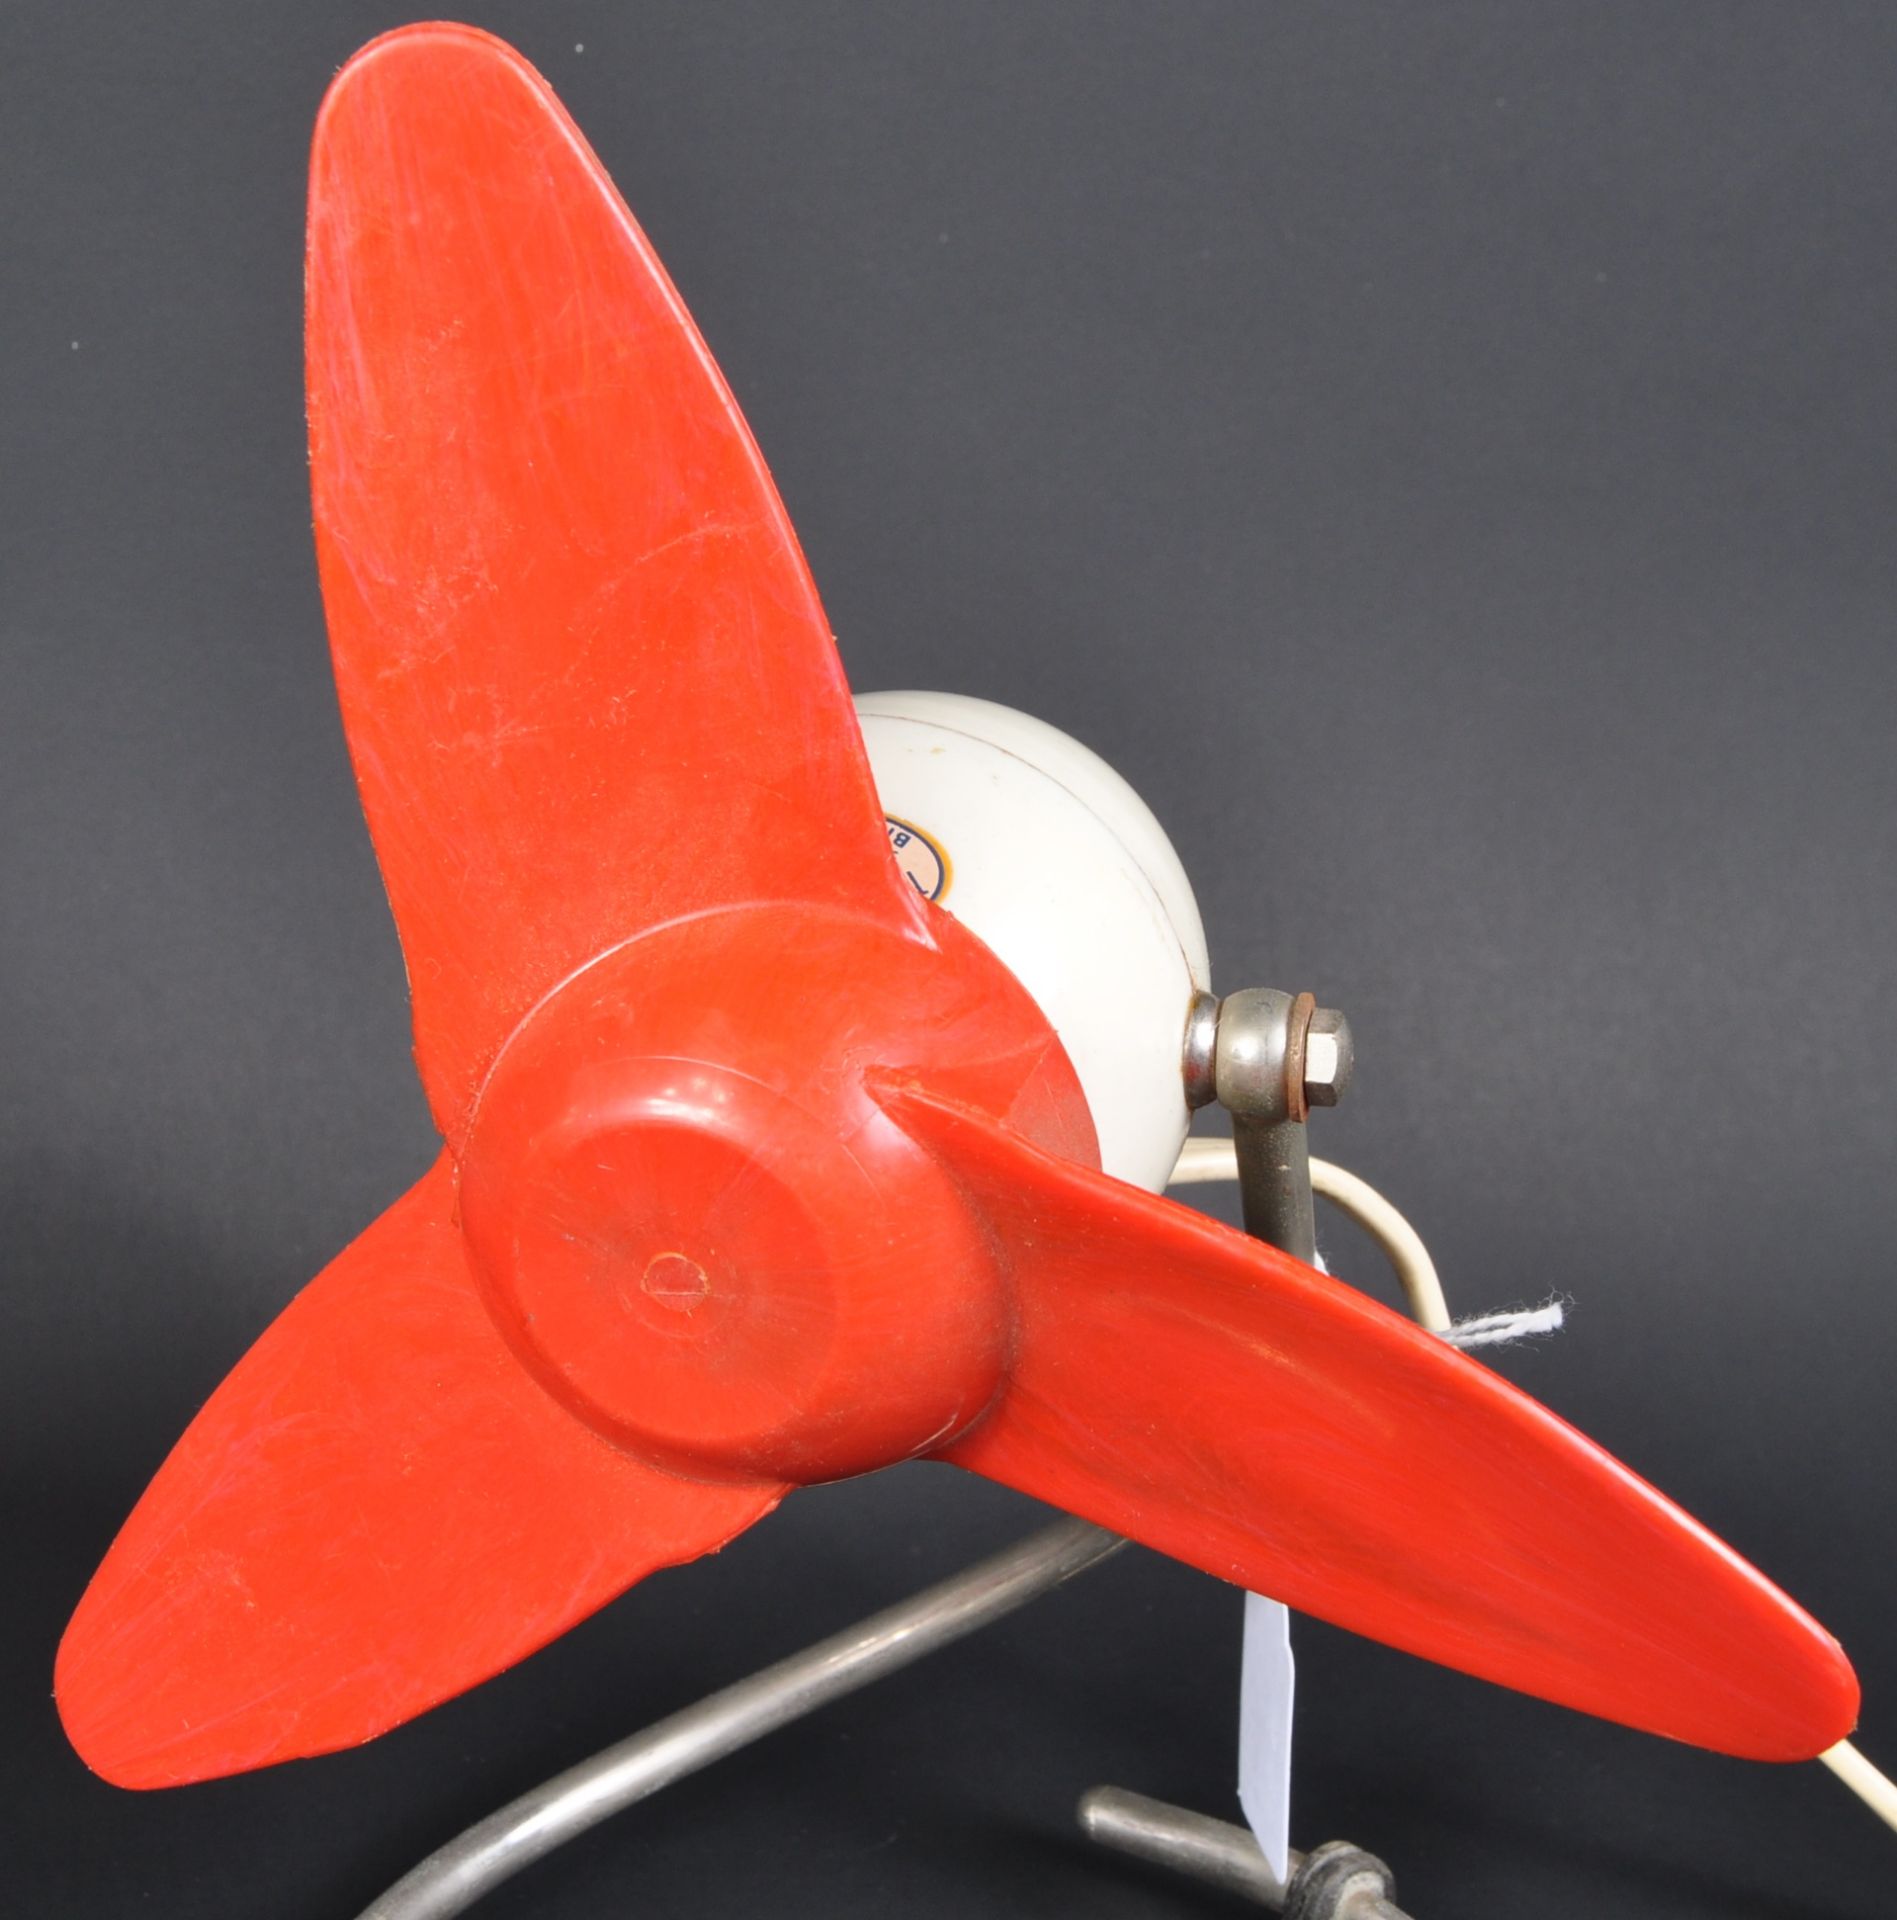 THE DRAGONFLY - MATCHING PAIR OF RETRO DESK FANS - Image 3 of 5